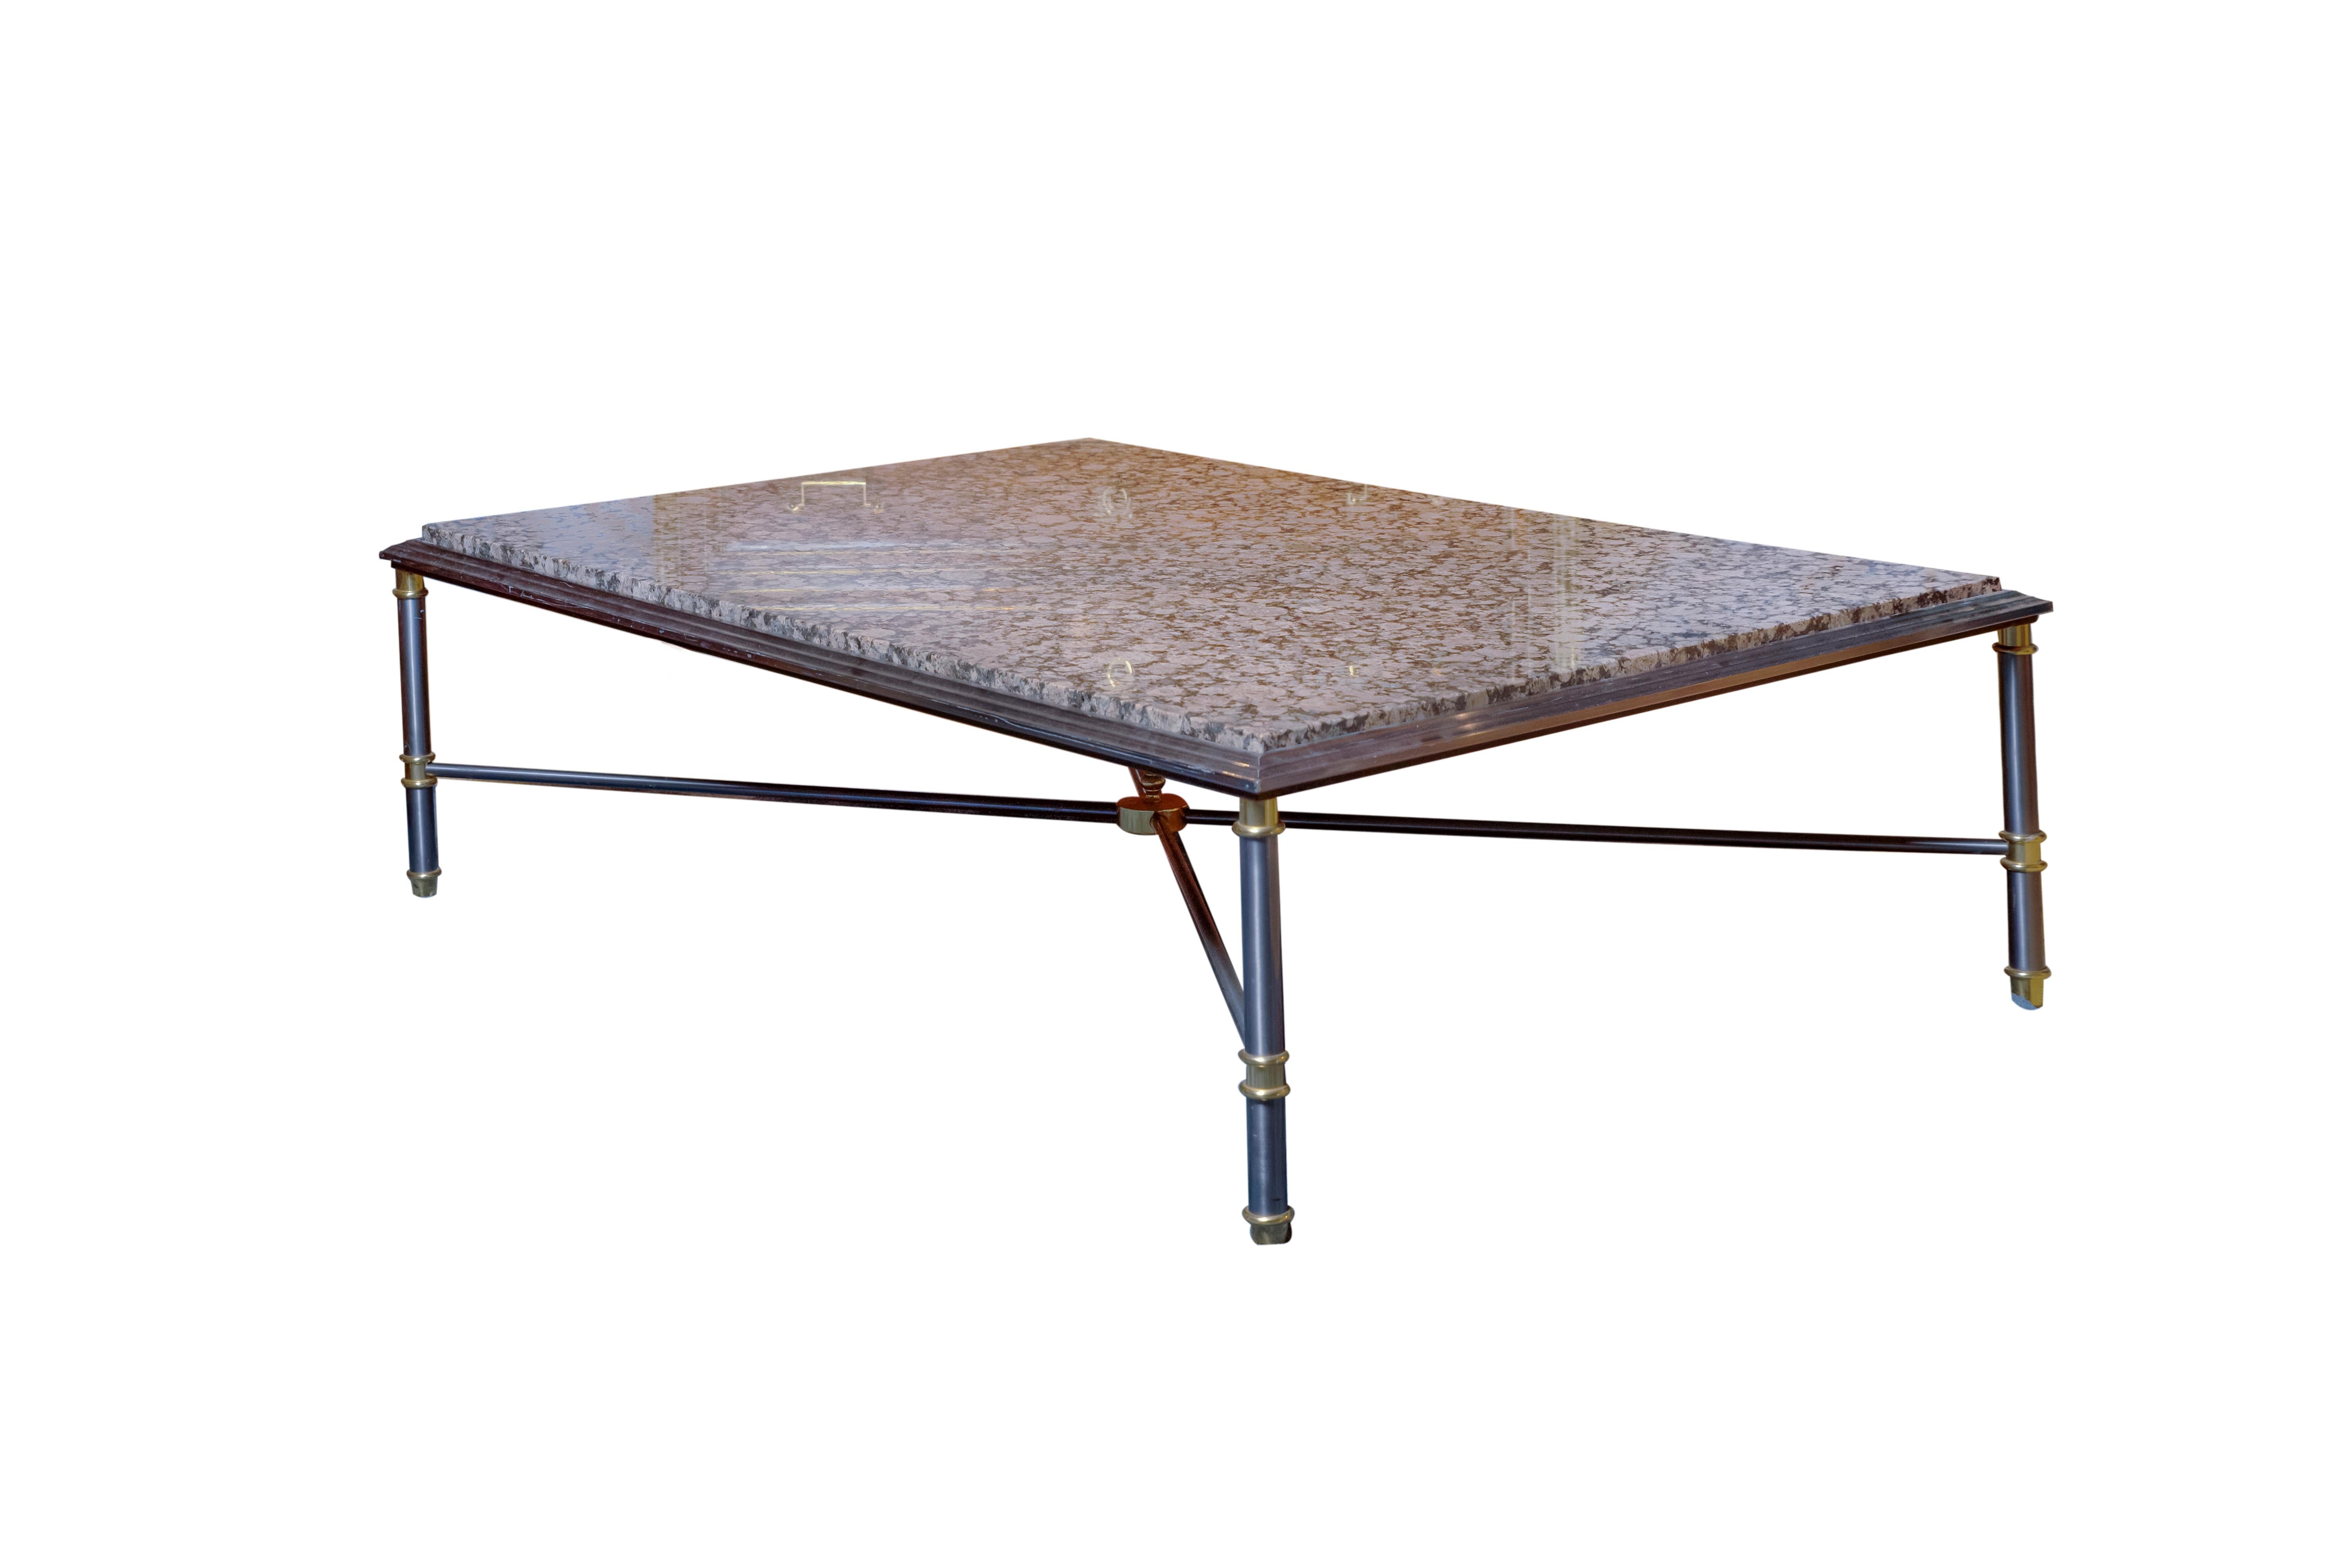 A 20th century neoclassical style coffee table or center table by Maison Charles. Four 